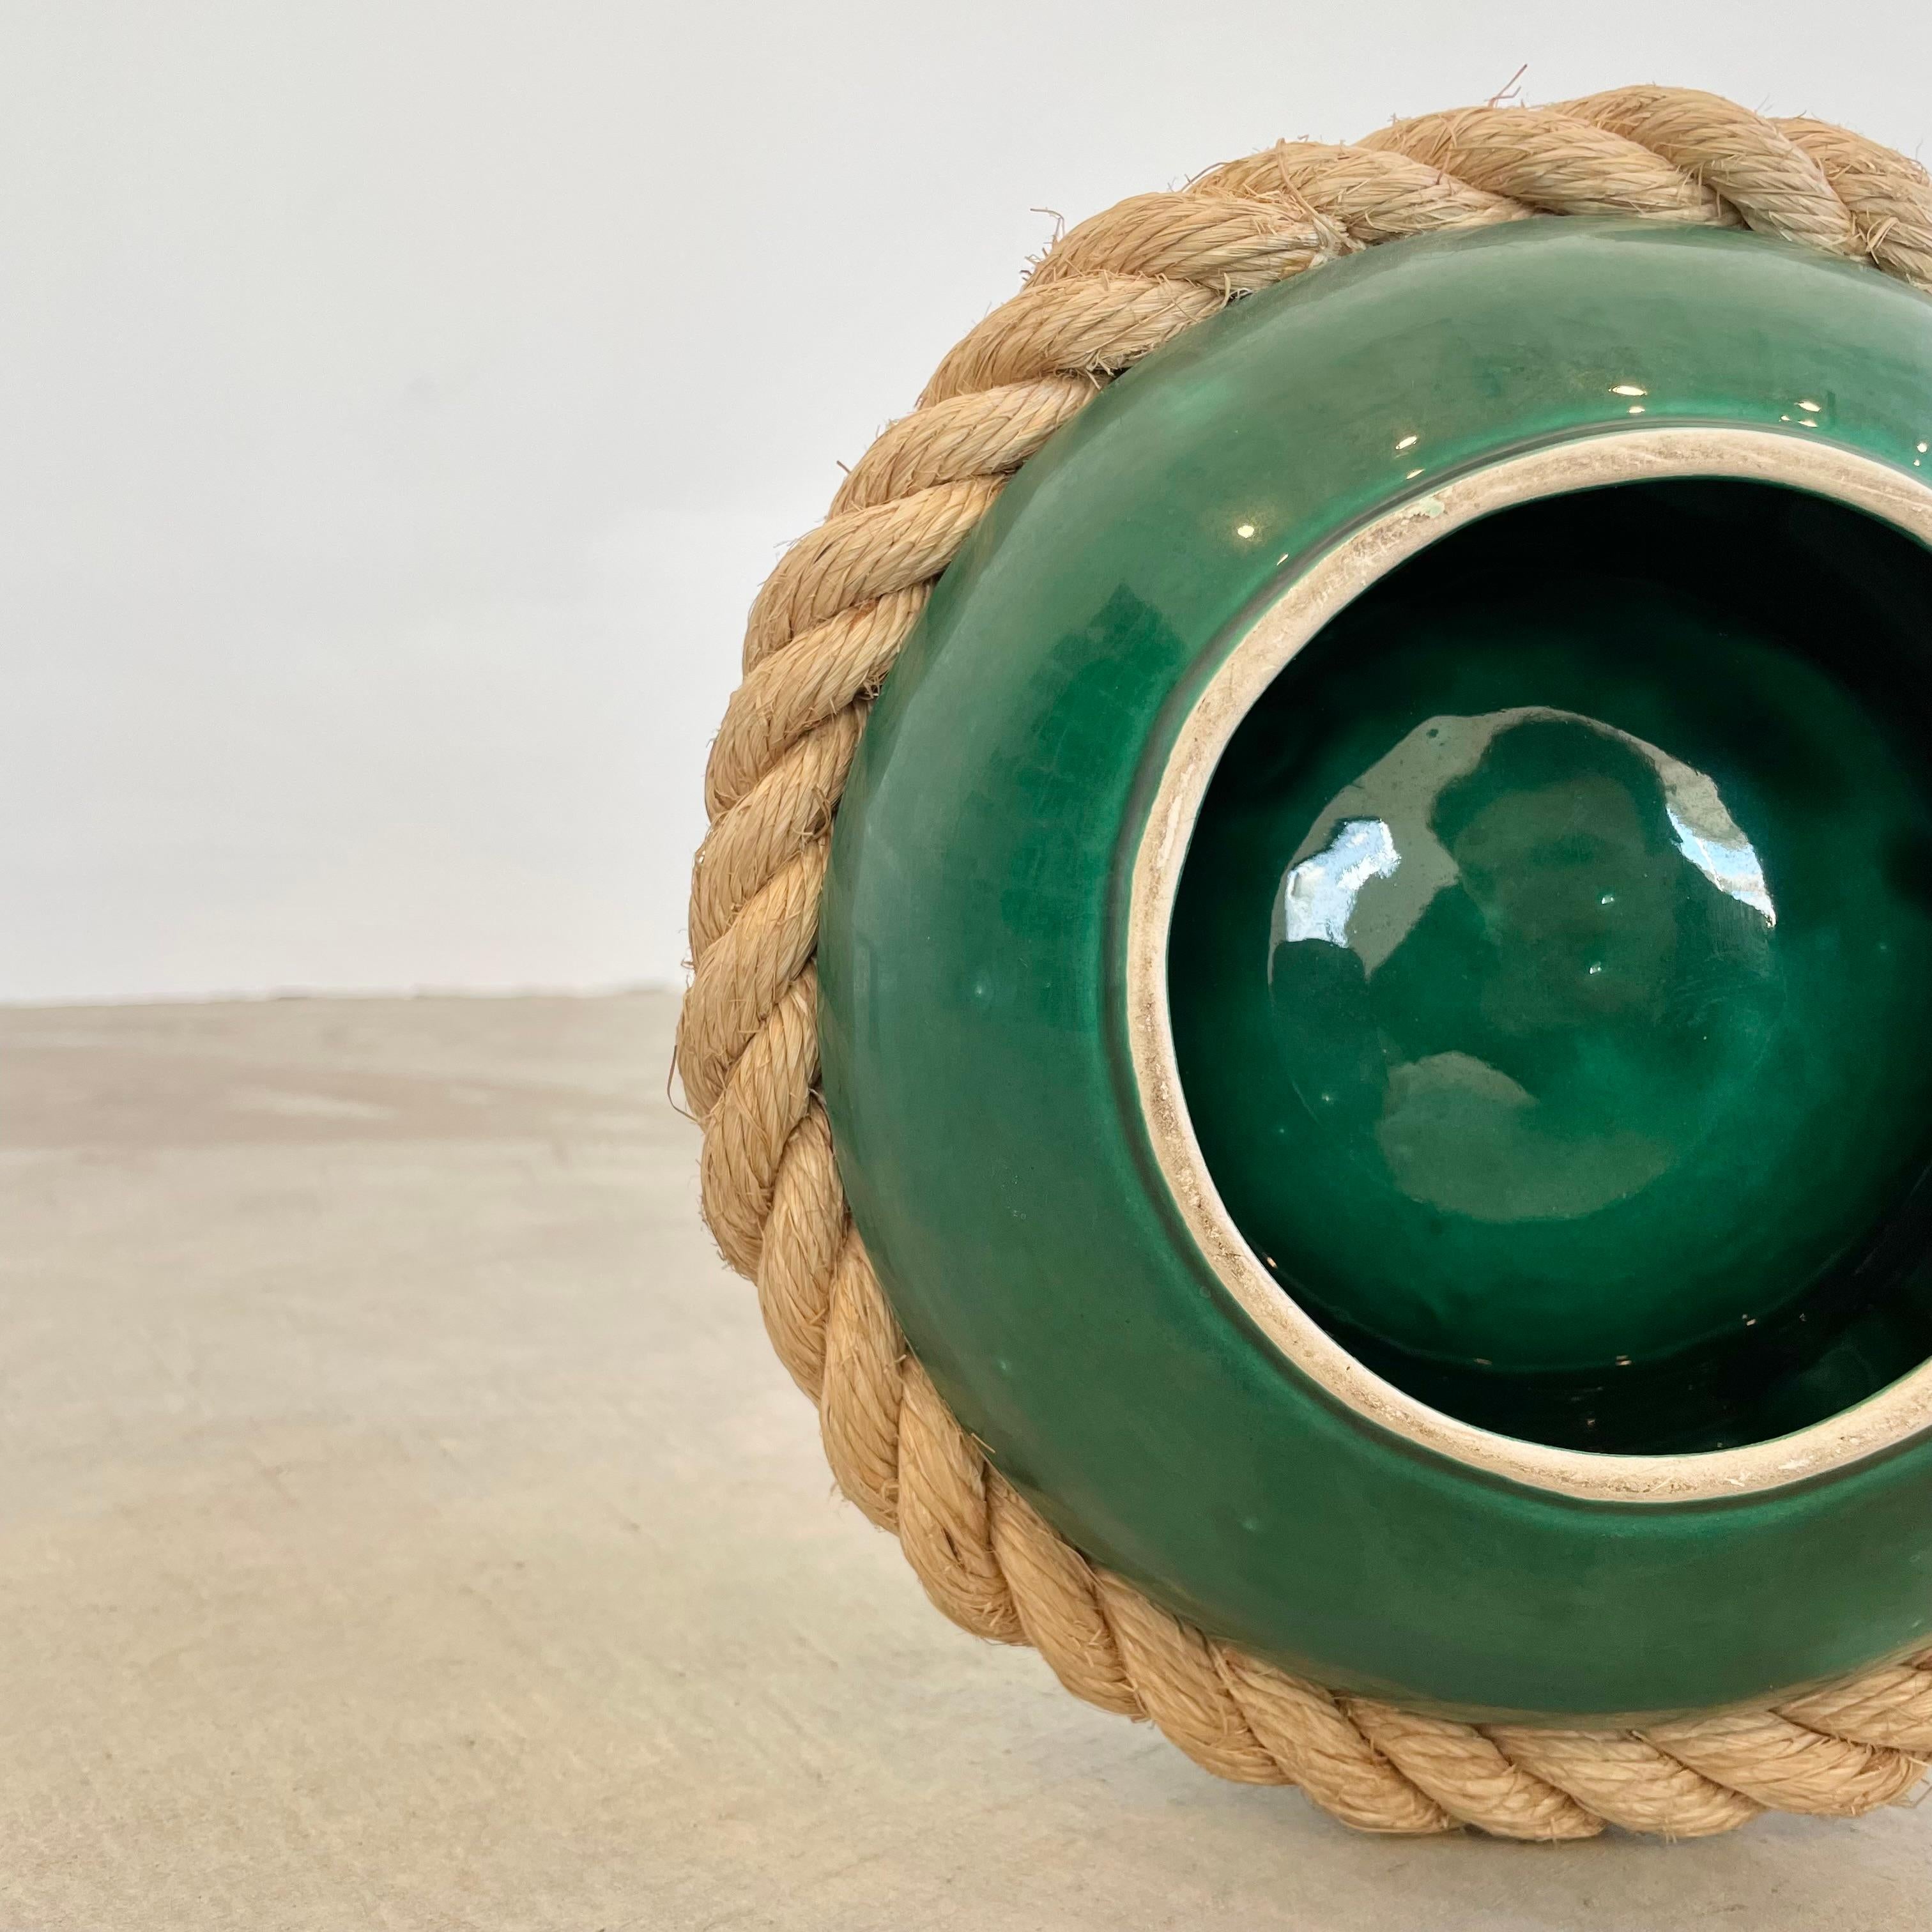 Mid-Century Modern Audoux Minet Style Green Ceramic Ashtray with Rope, 1970s France